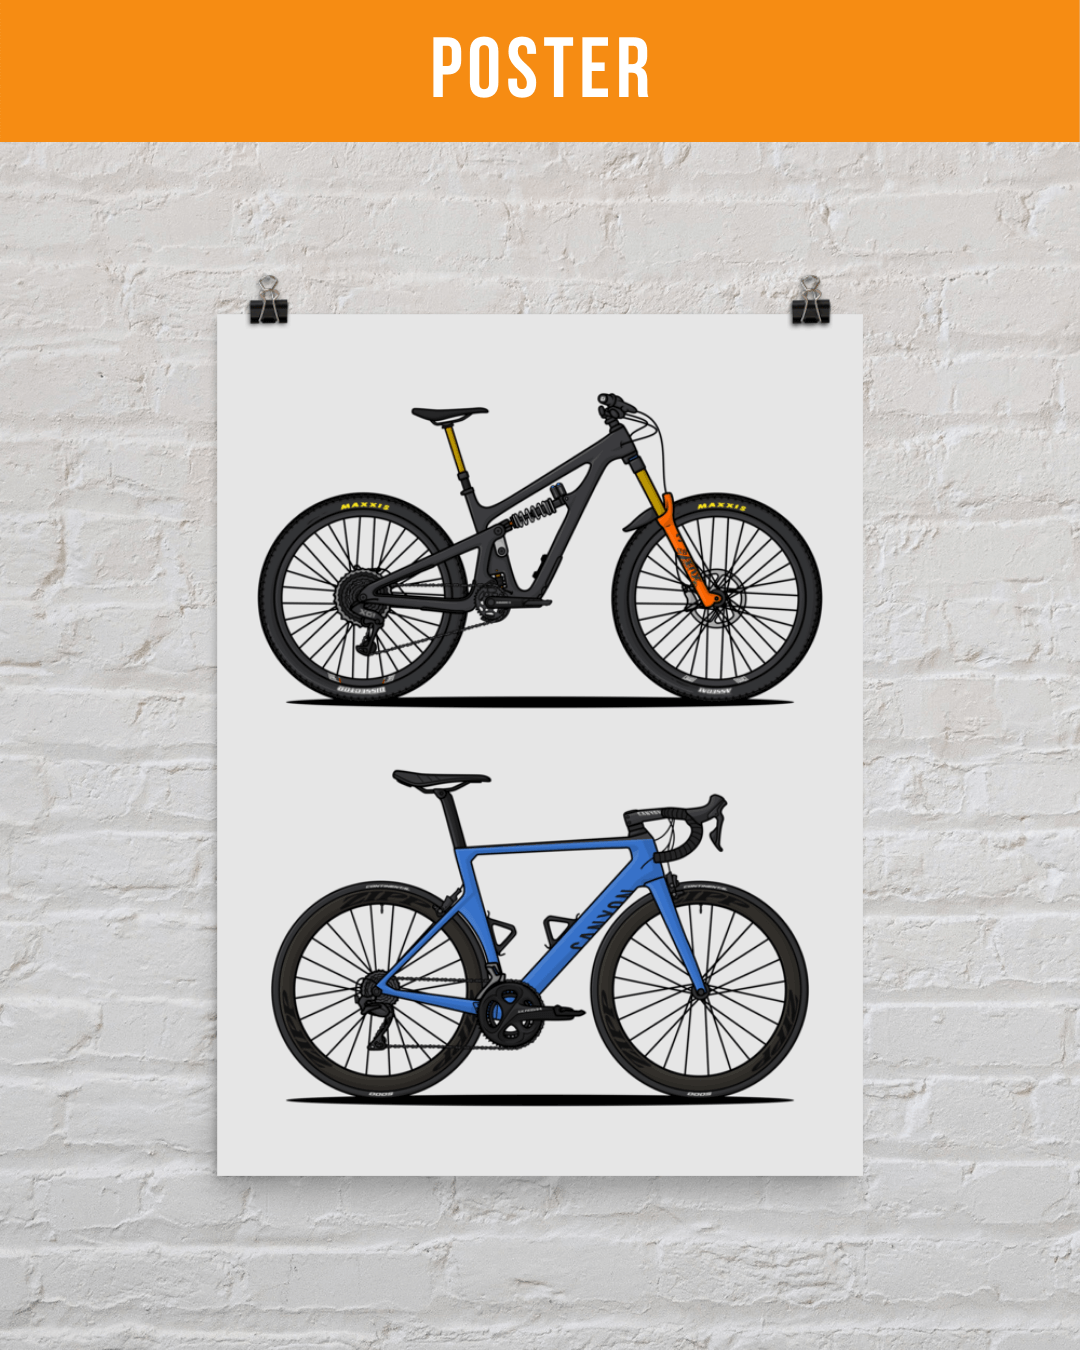 Personalized Bicycle Poster Print 2 bikes by Stand Out Bikes 